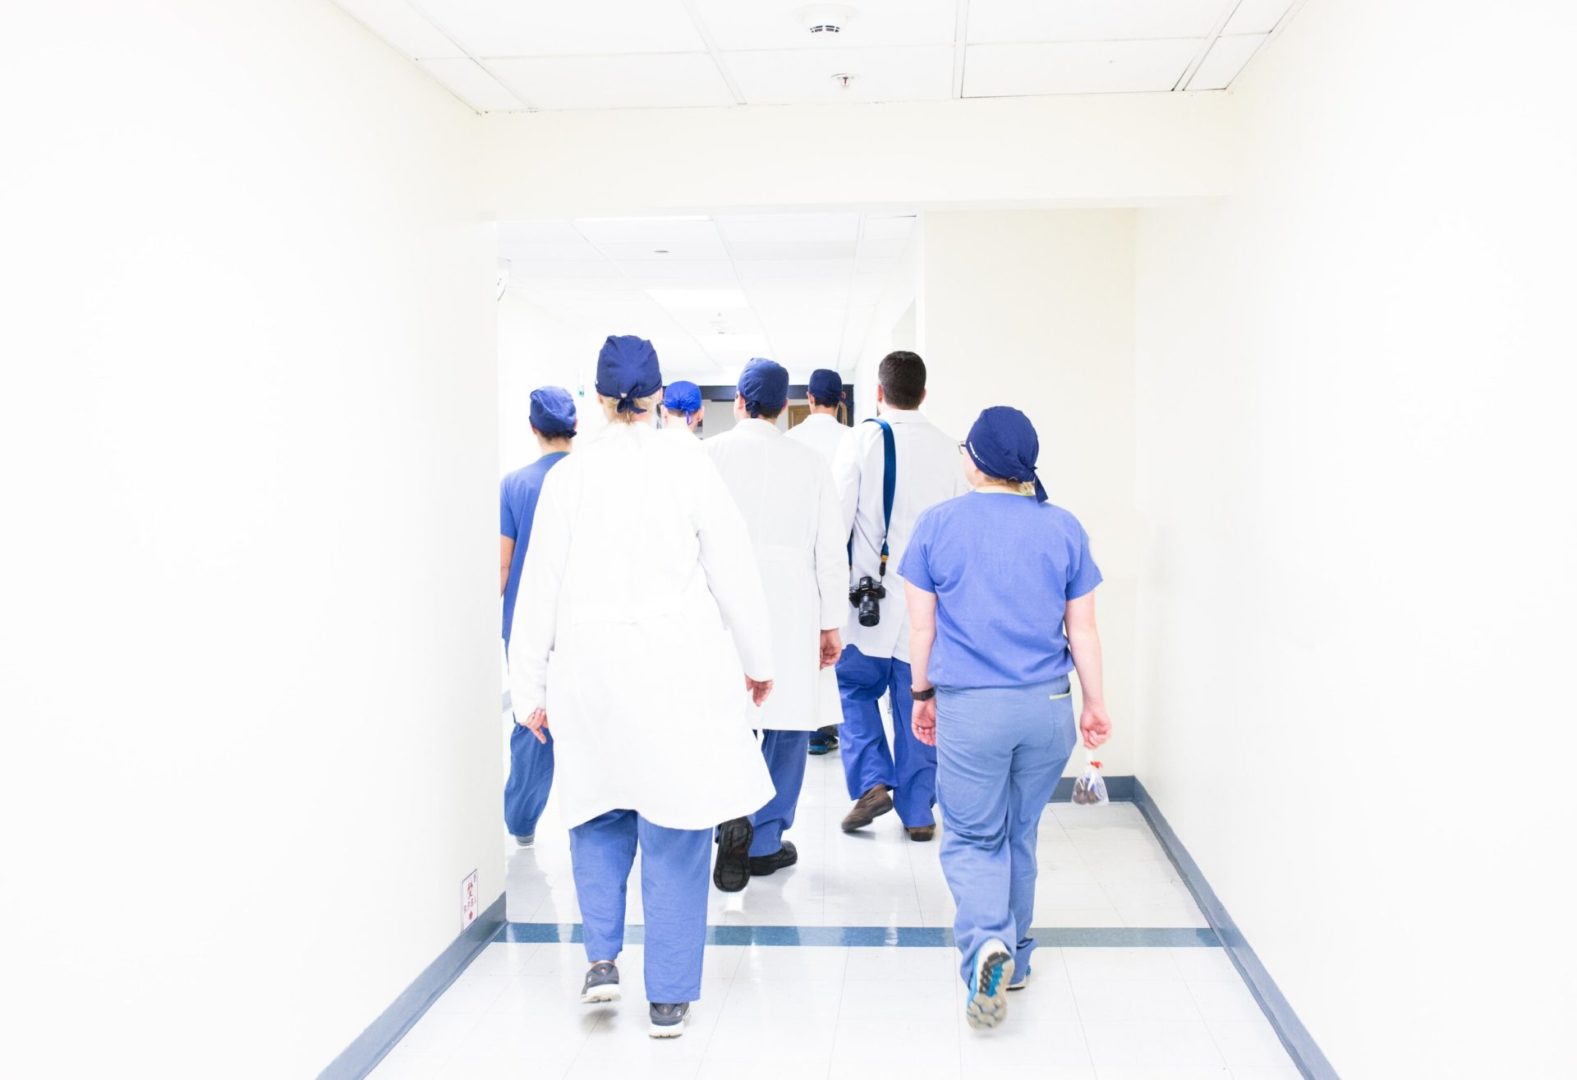 Fame in the Face of a Pandemic:  How have doctors and nurses become social media influencers?